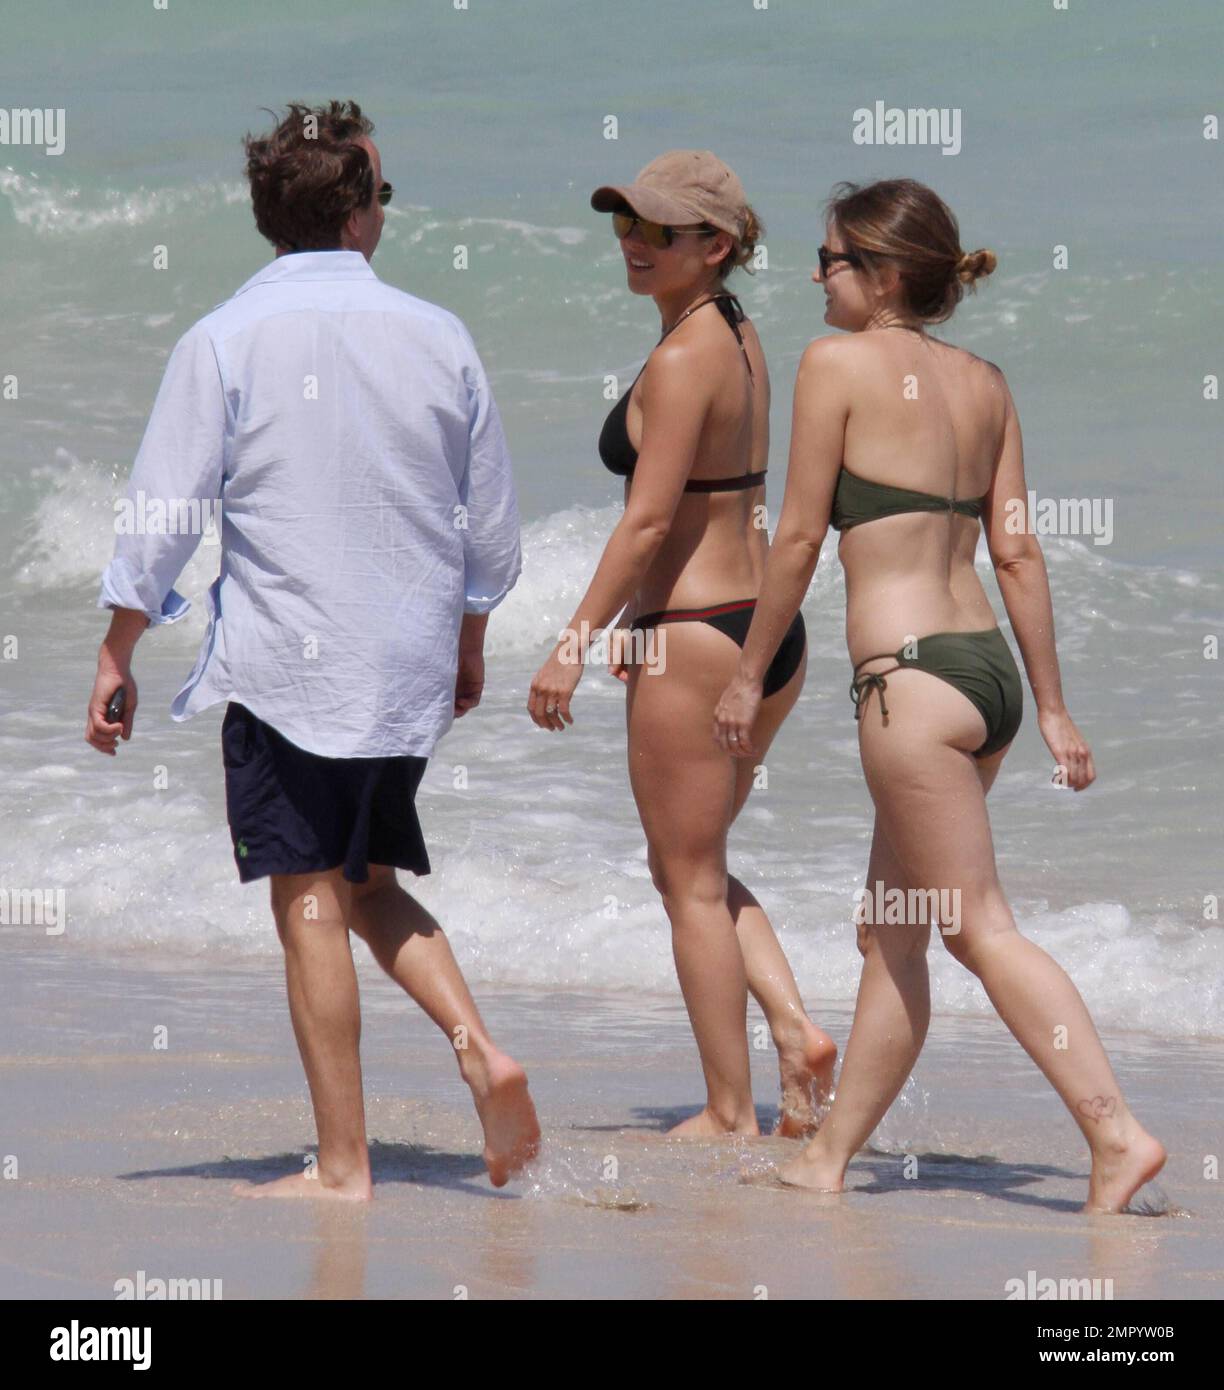 Elsa Pataky shows off her amazing figure whilst strolling along the beach in a black bikini and wearing a baseball cap.   The Spanish actress spent time in Miami this week to promote her new movie "Fast Five." Miami Beach, FL. 4/7/11. Stock Photo